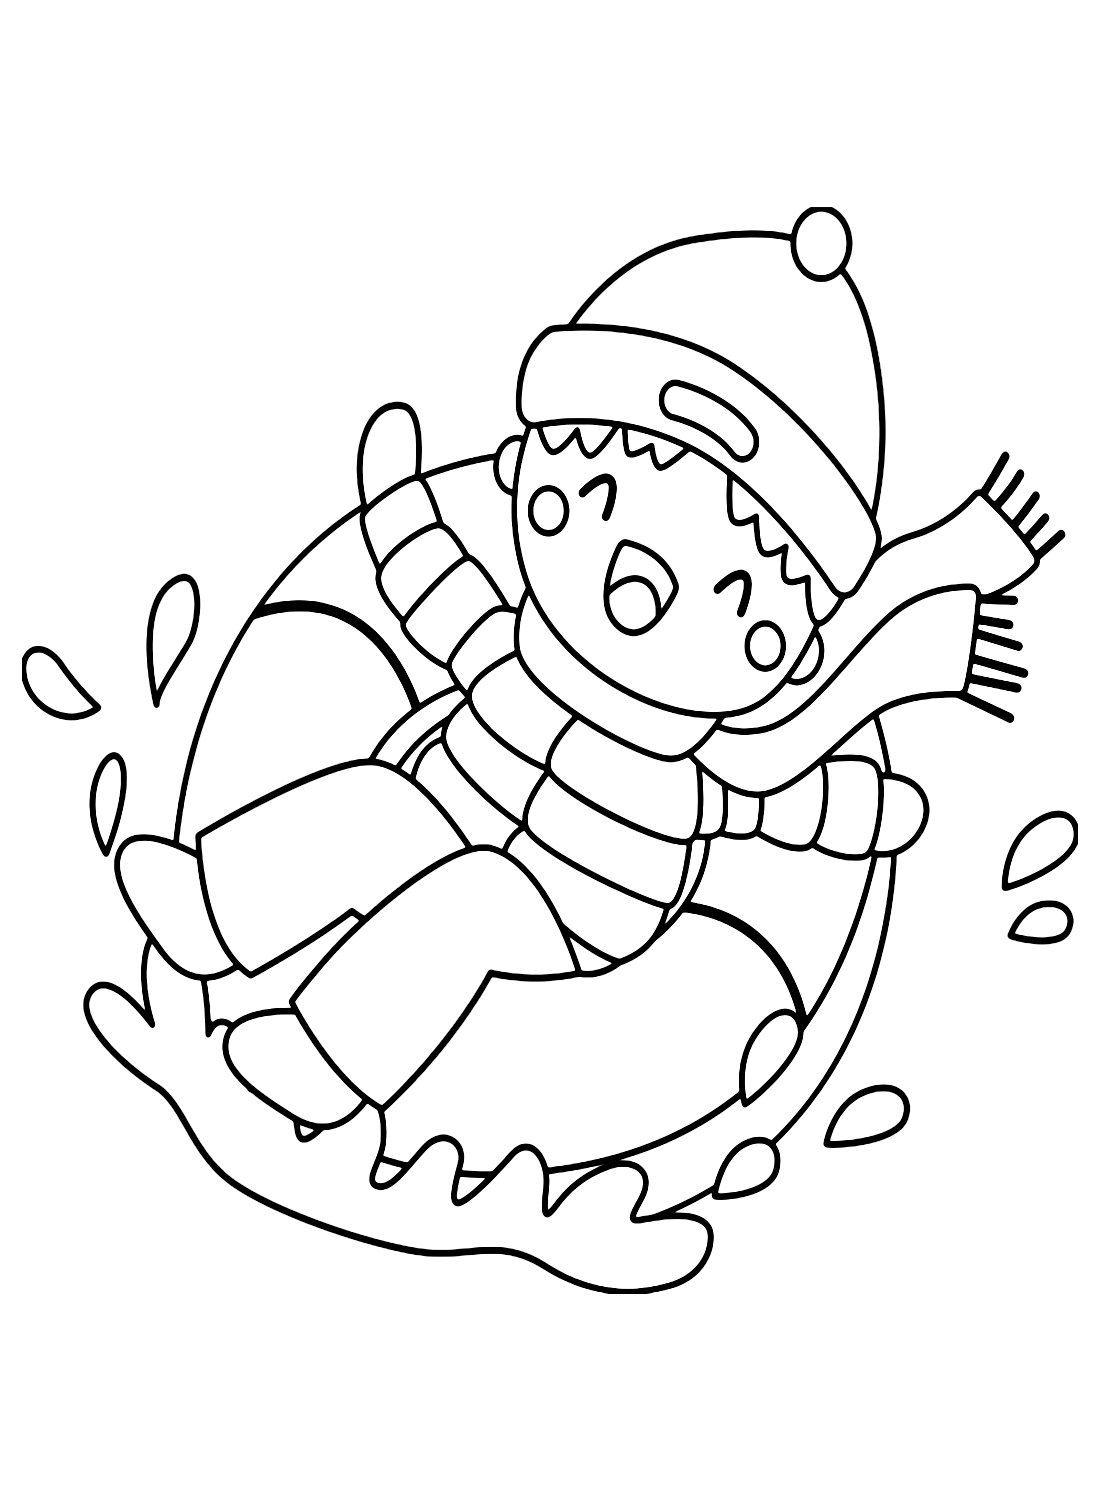 Boy Playing Winter Sports Coloring Page - Free Printable Coloring Pages